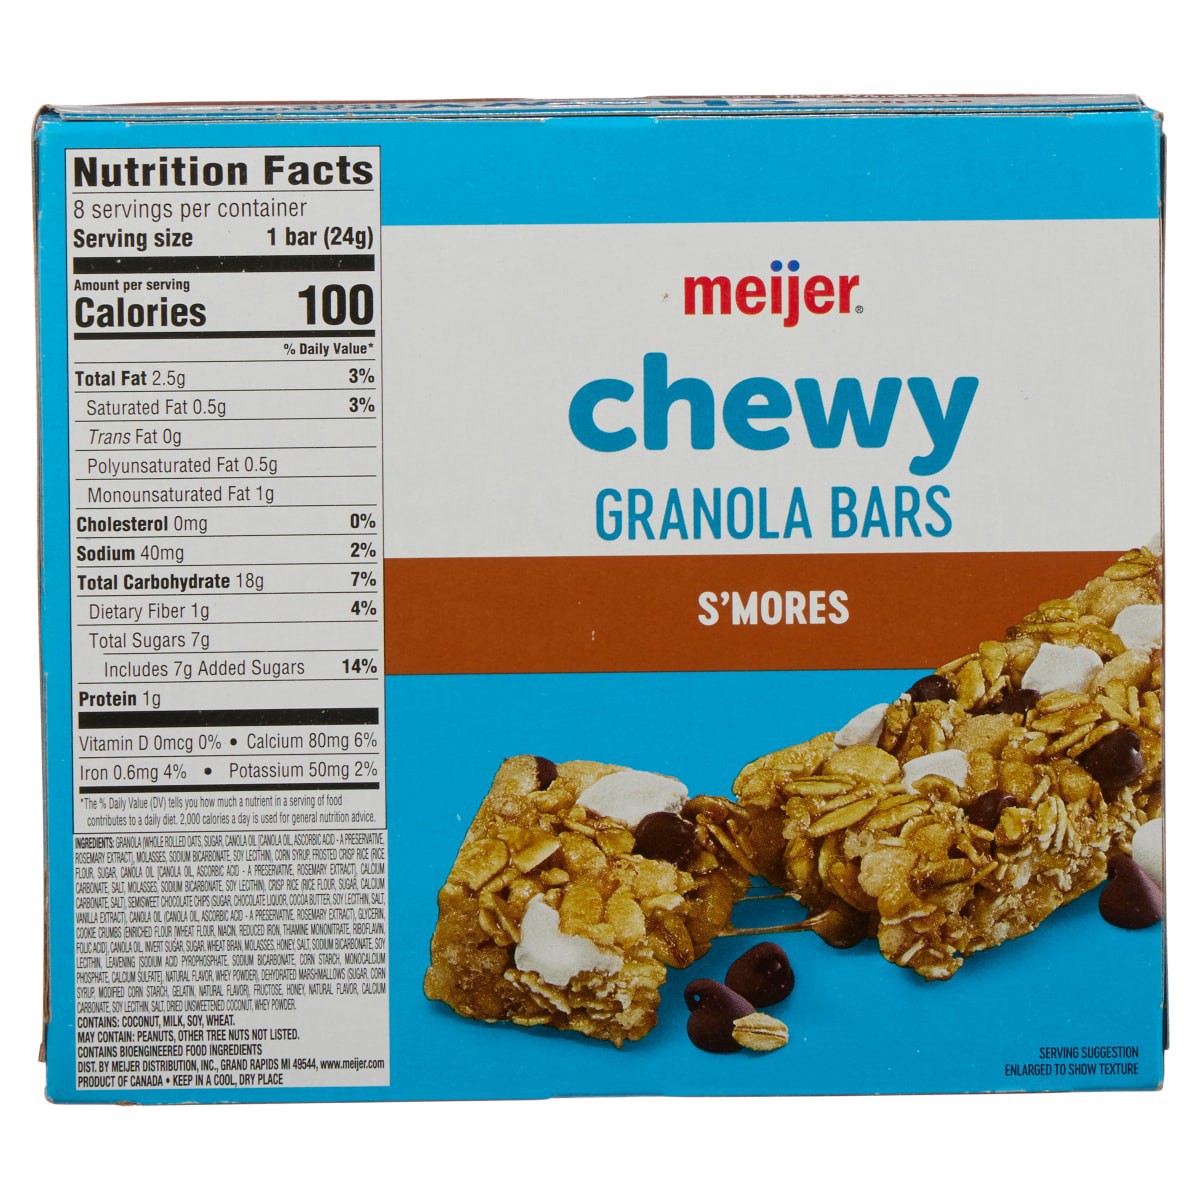 slide 21 of 29, Meijer Chewy Granola Bar, S'mores, 6.77 oz, 8 ct